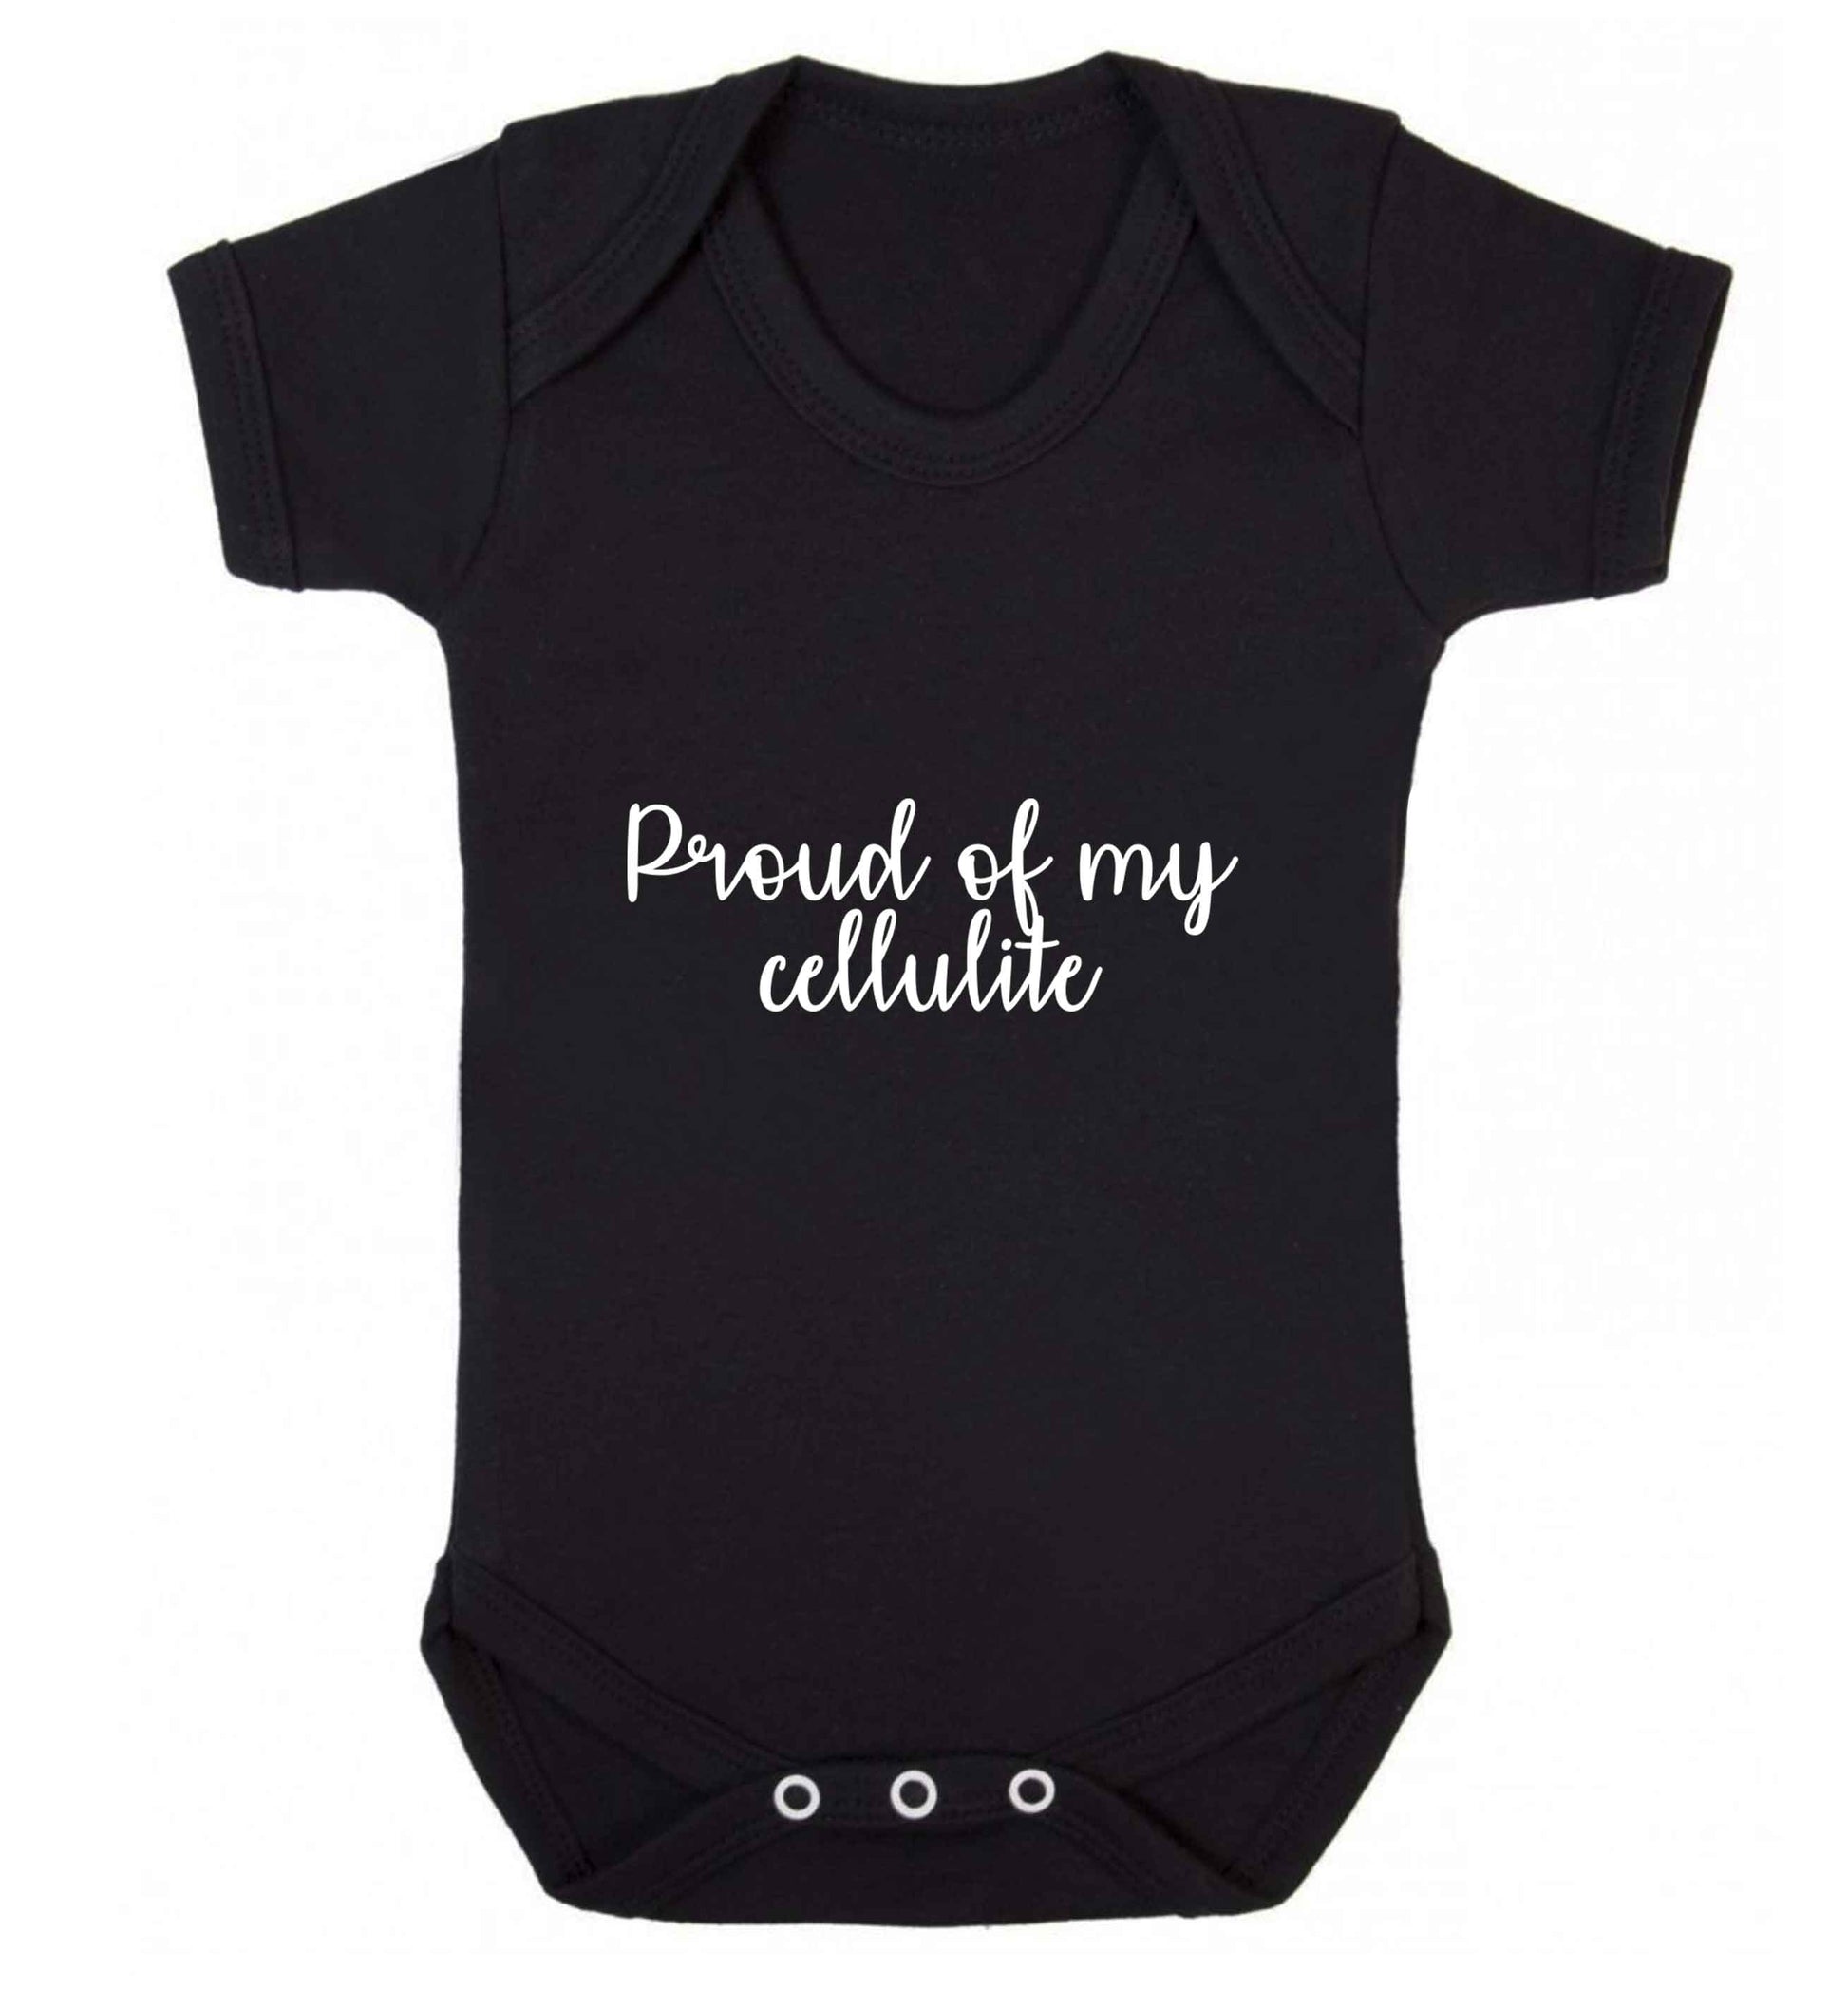 Proud of my cellulite baby vest black 18-24 months